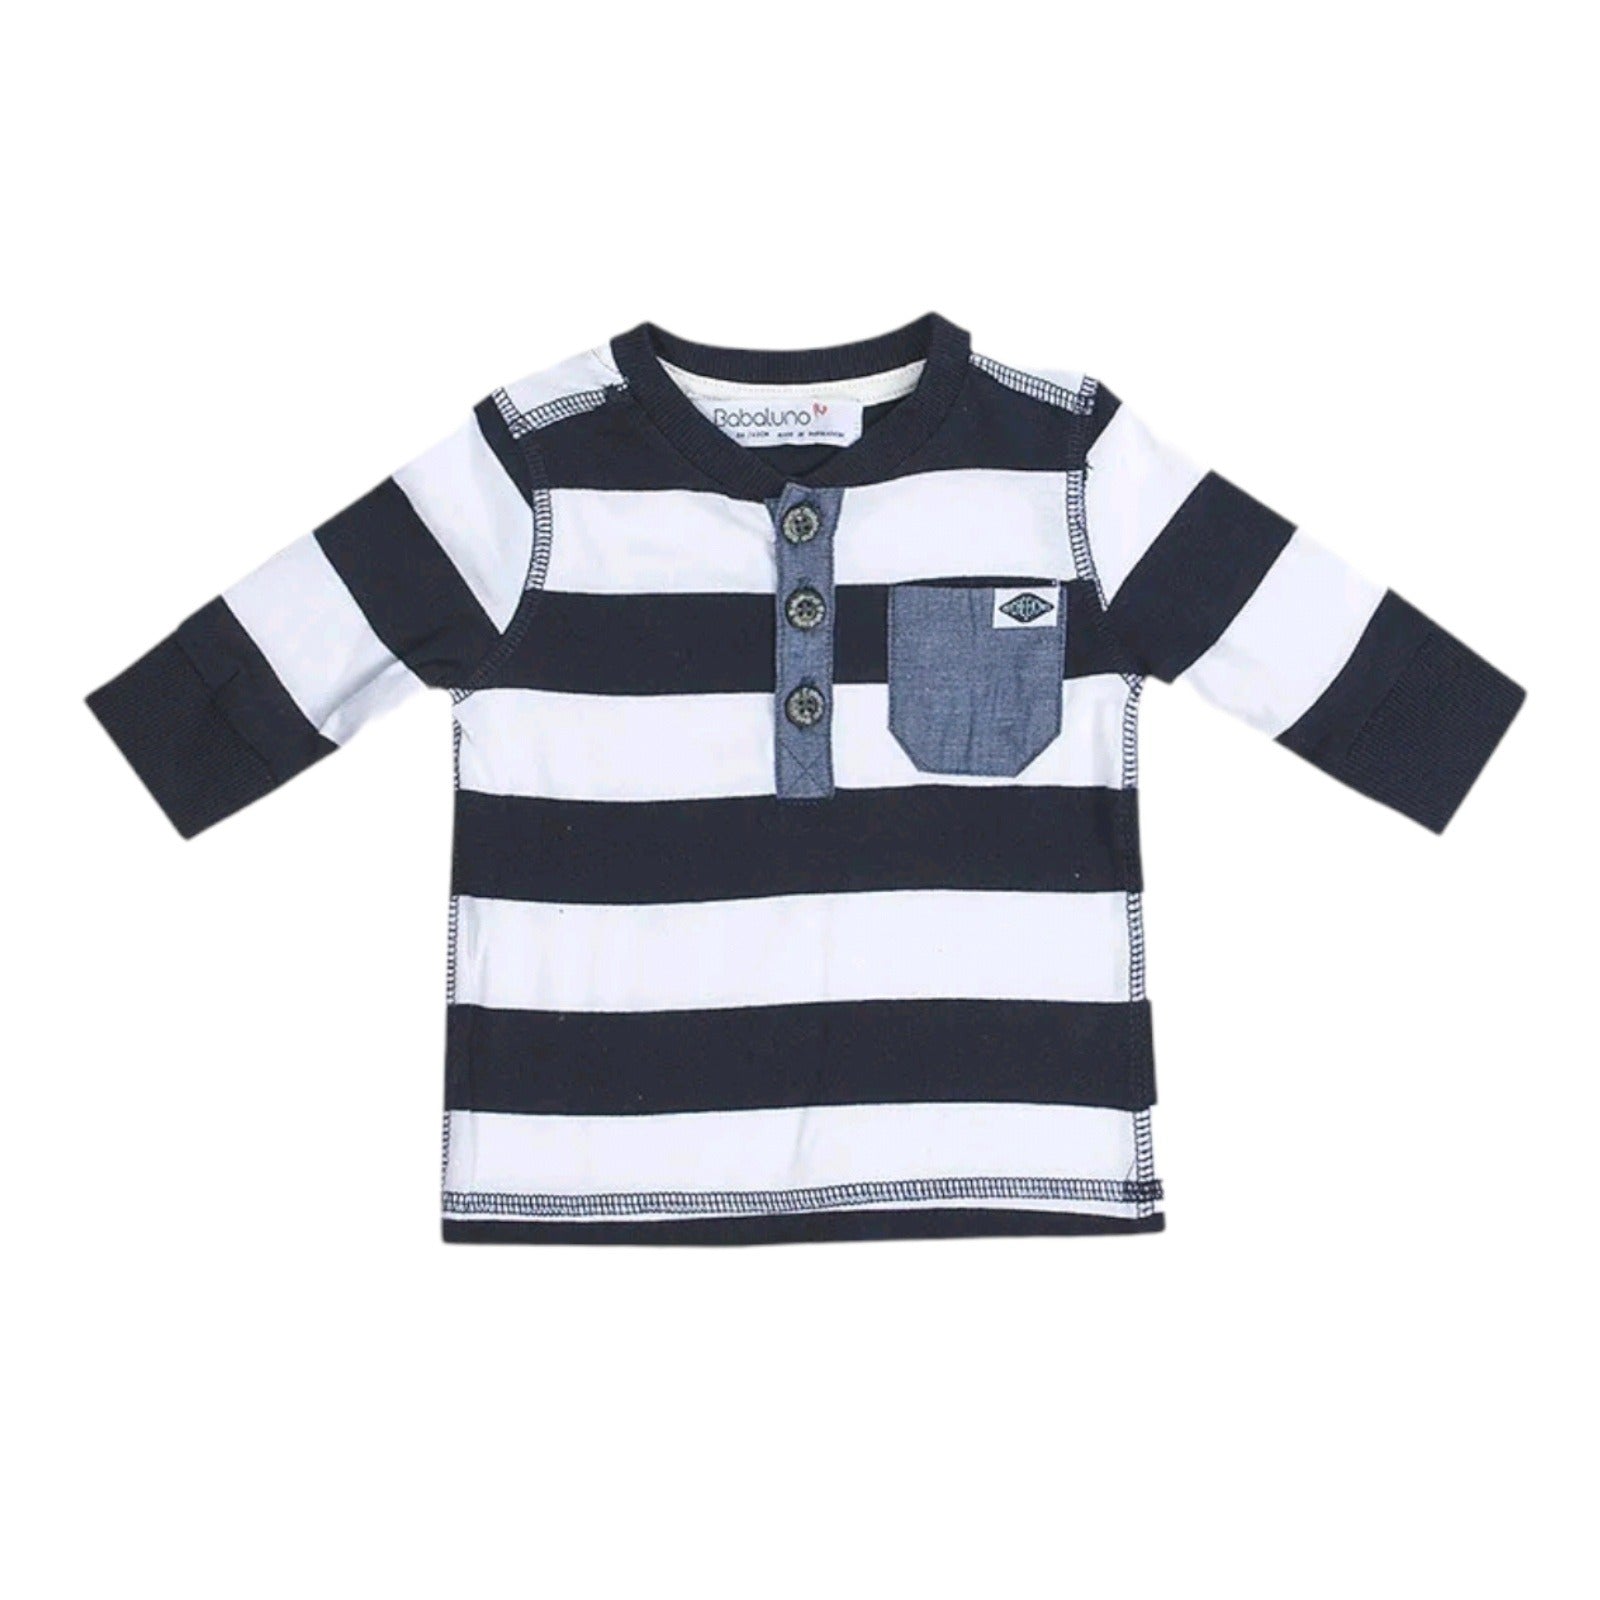 Striped Long Sleeve Rugby Style Tops